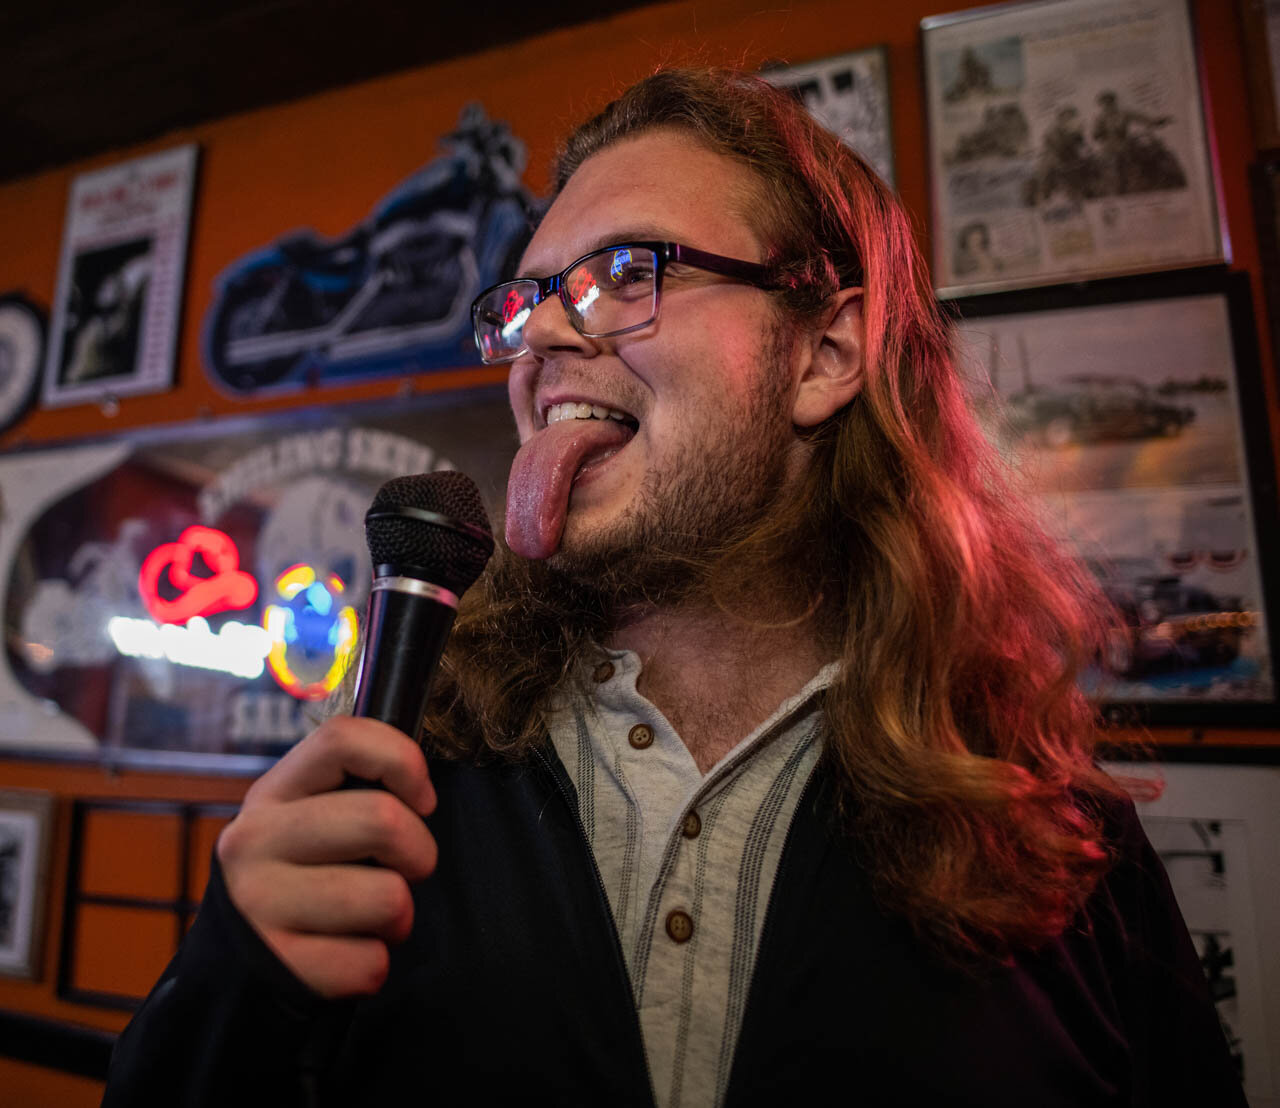  Preston Frick, Bass Player of Gorilla Party makes faces at his friends during soundcheck at The Smiling Skull, in Athens, Ohio, on Thursday, November 21, 2019. 